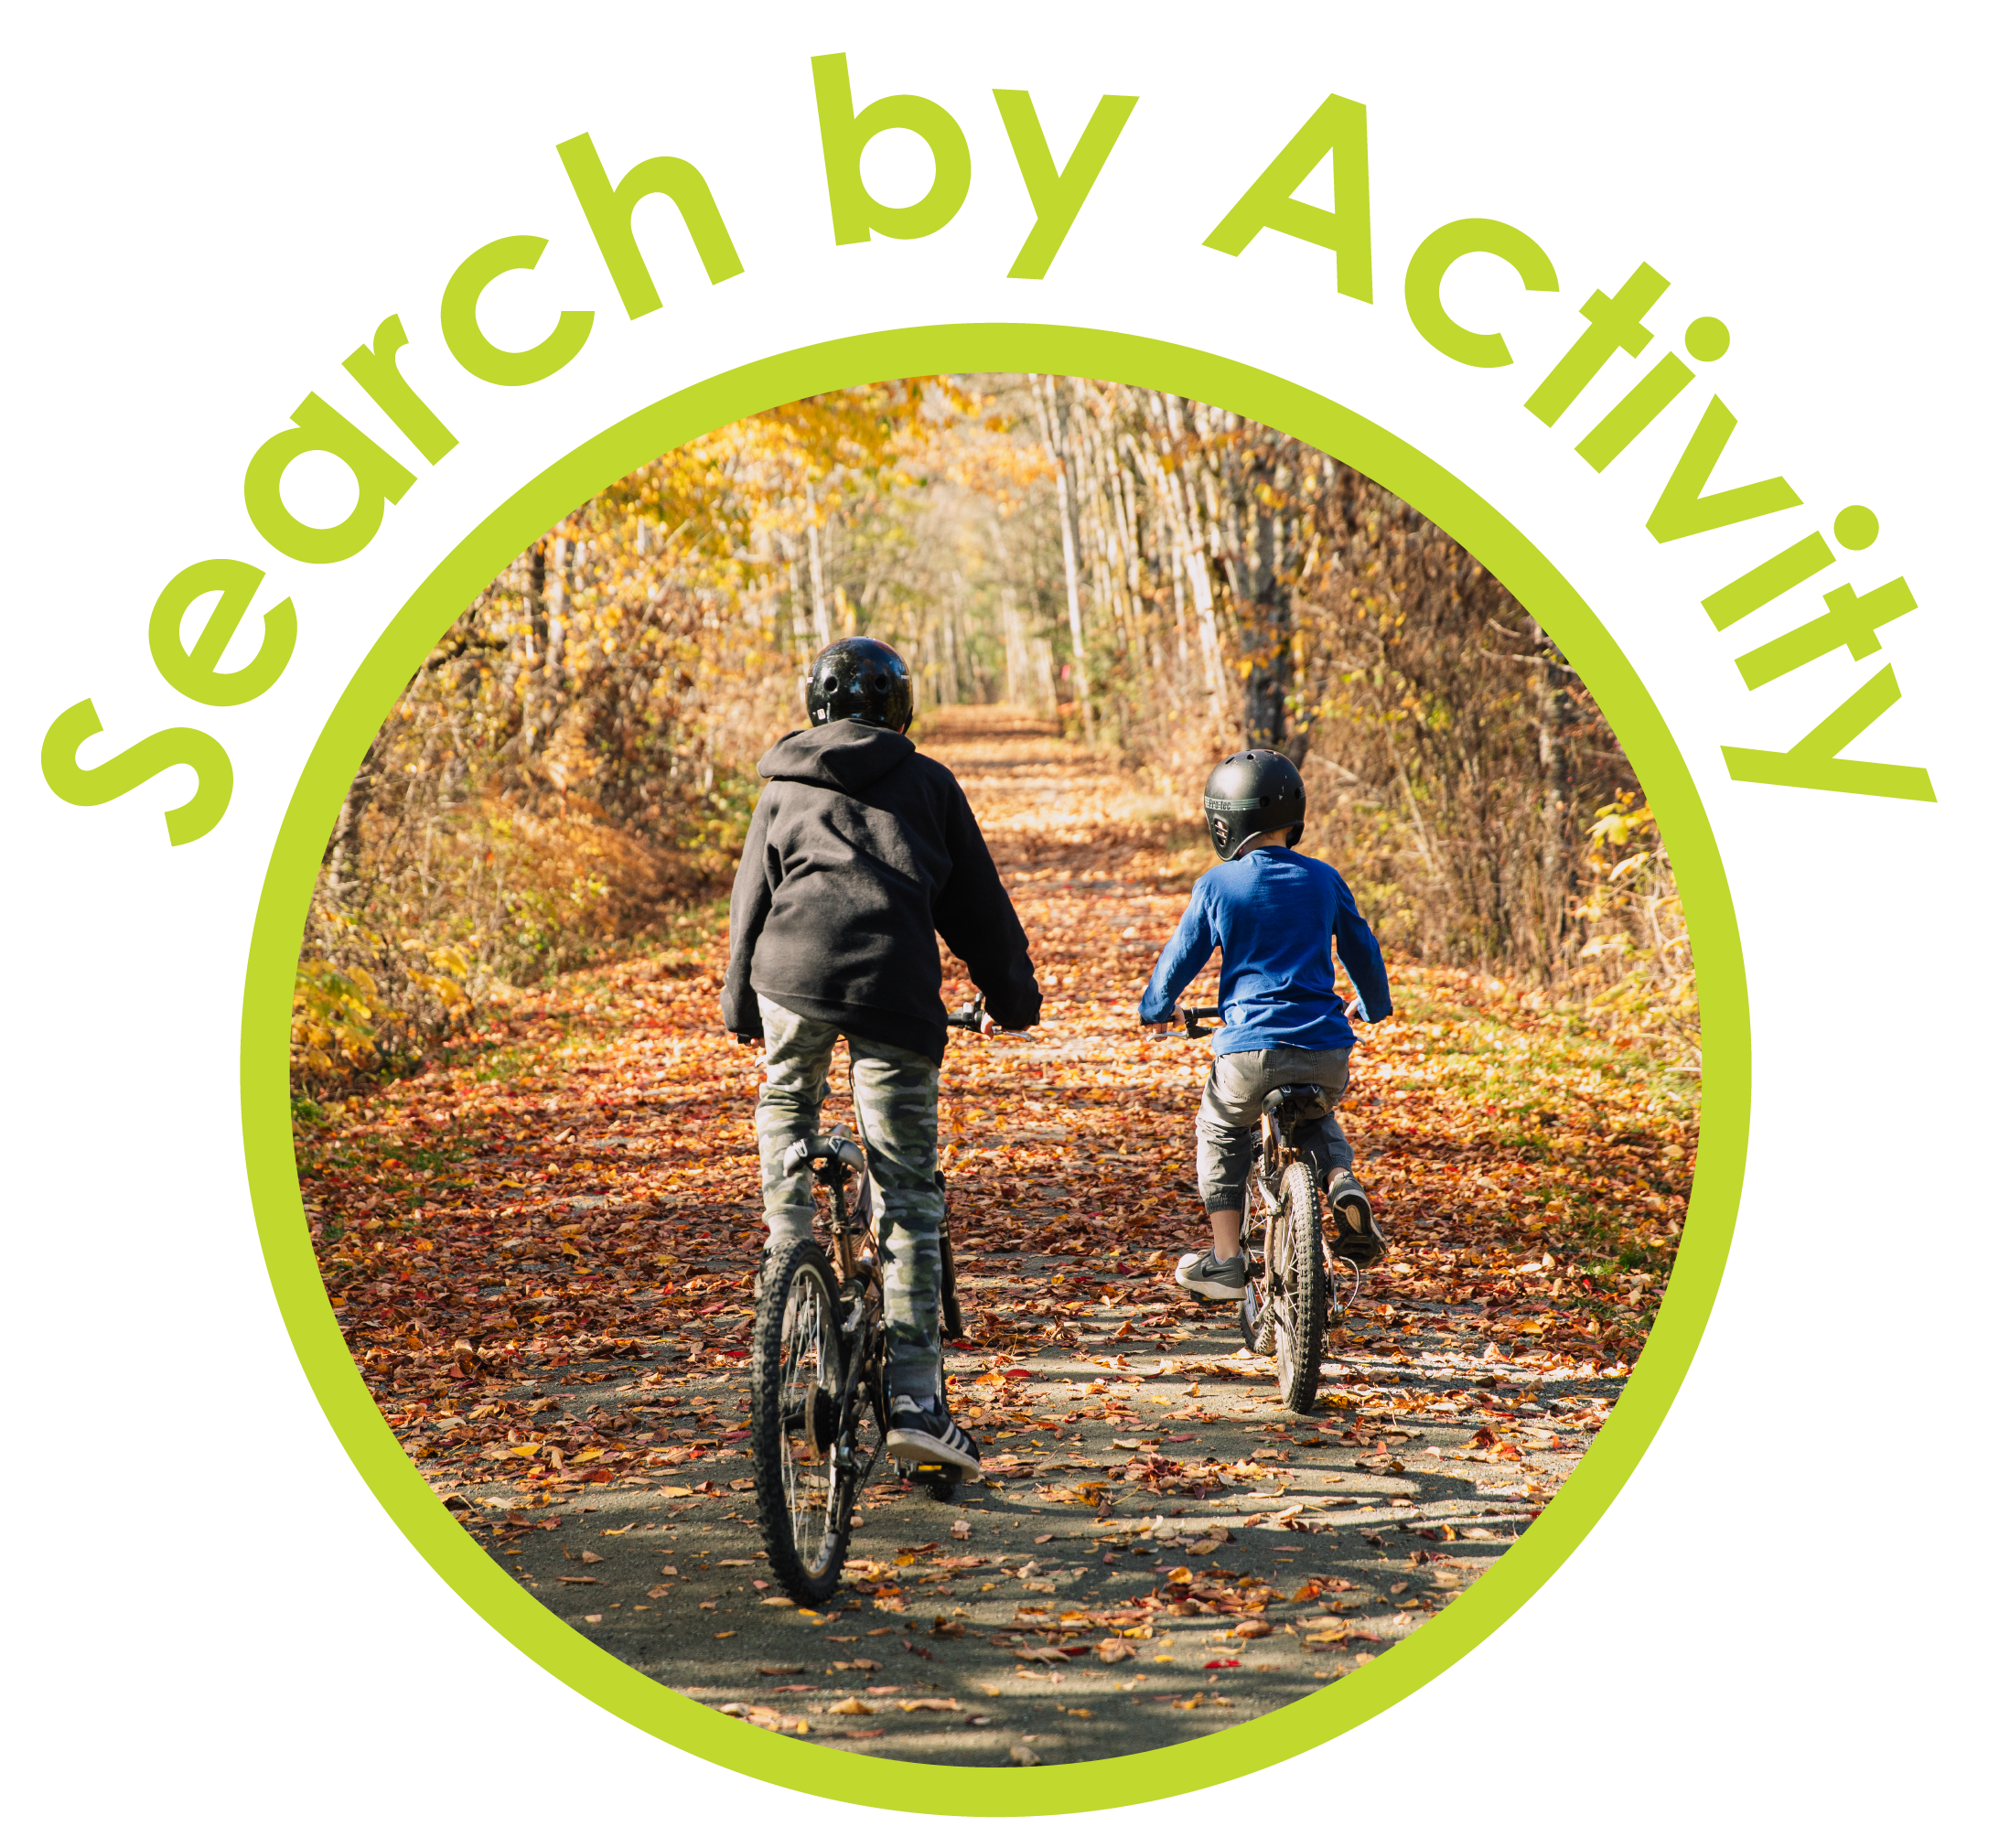 Clickable icon to search CVRD parks by activity